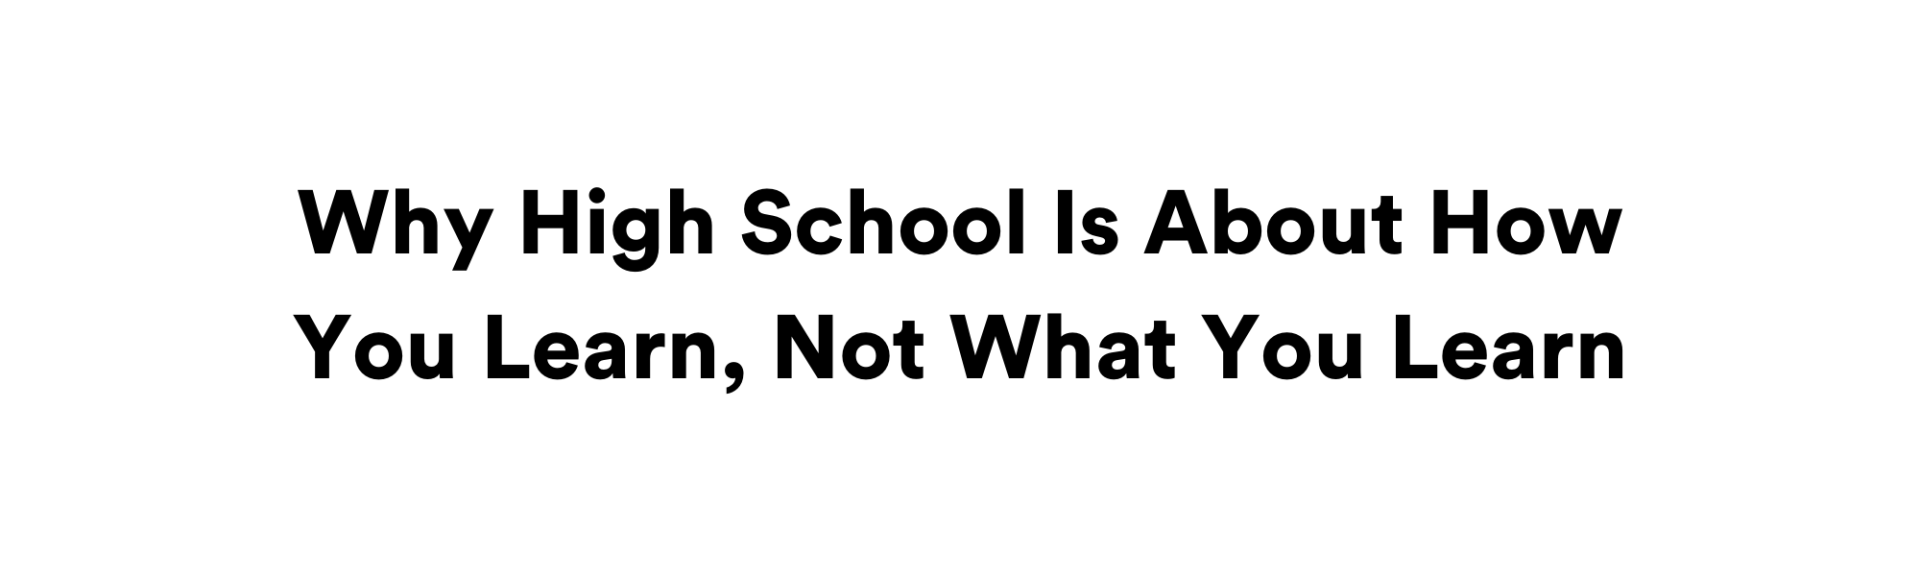 Leading Learners Why High School Is About How You Learn, Not What You Learn